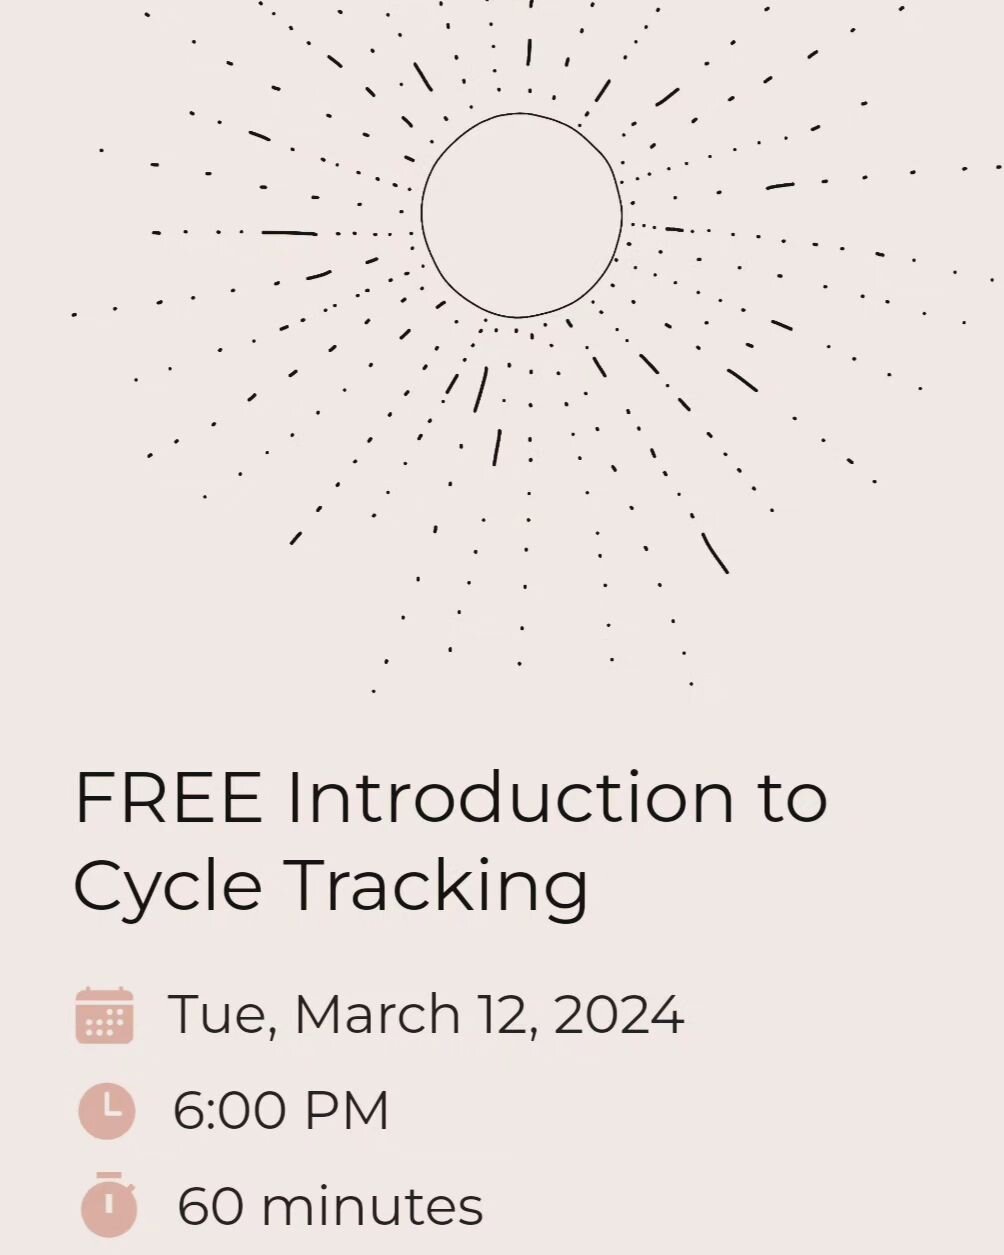 In person event @WelcomeGoddess studio in Golden, CO Tuesday, March 12, 2024, 6-7pm
Register 👉 link in bio

Reclaim the wisdom of your womb with cycle tracking!

Want to get off birth control and still avoid pregnancy? Are you trying to conceive and